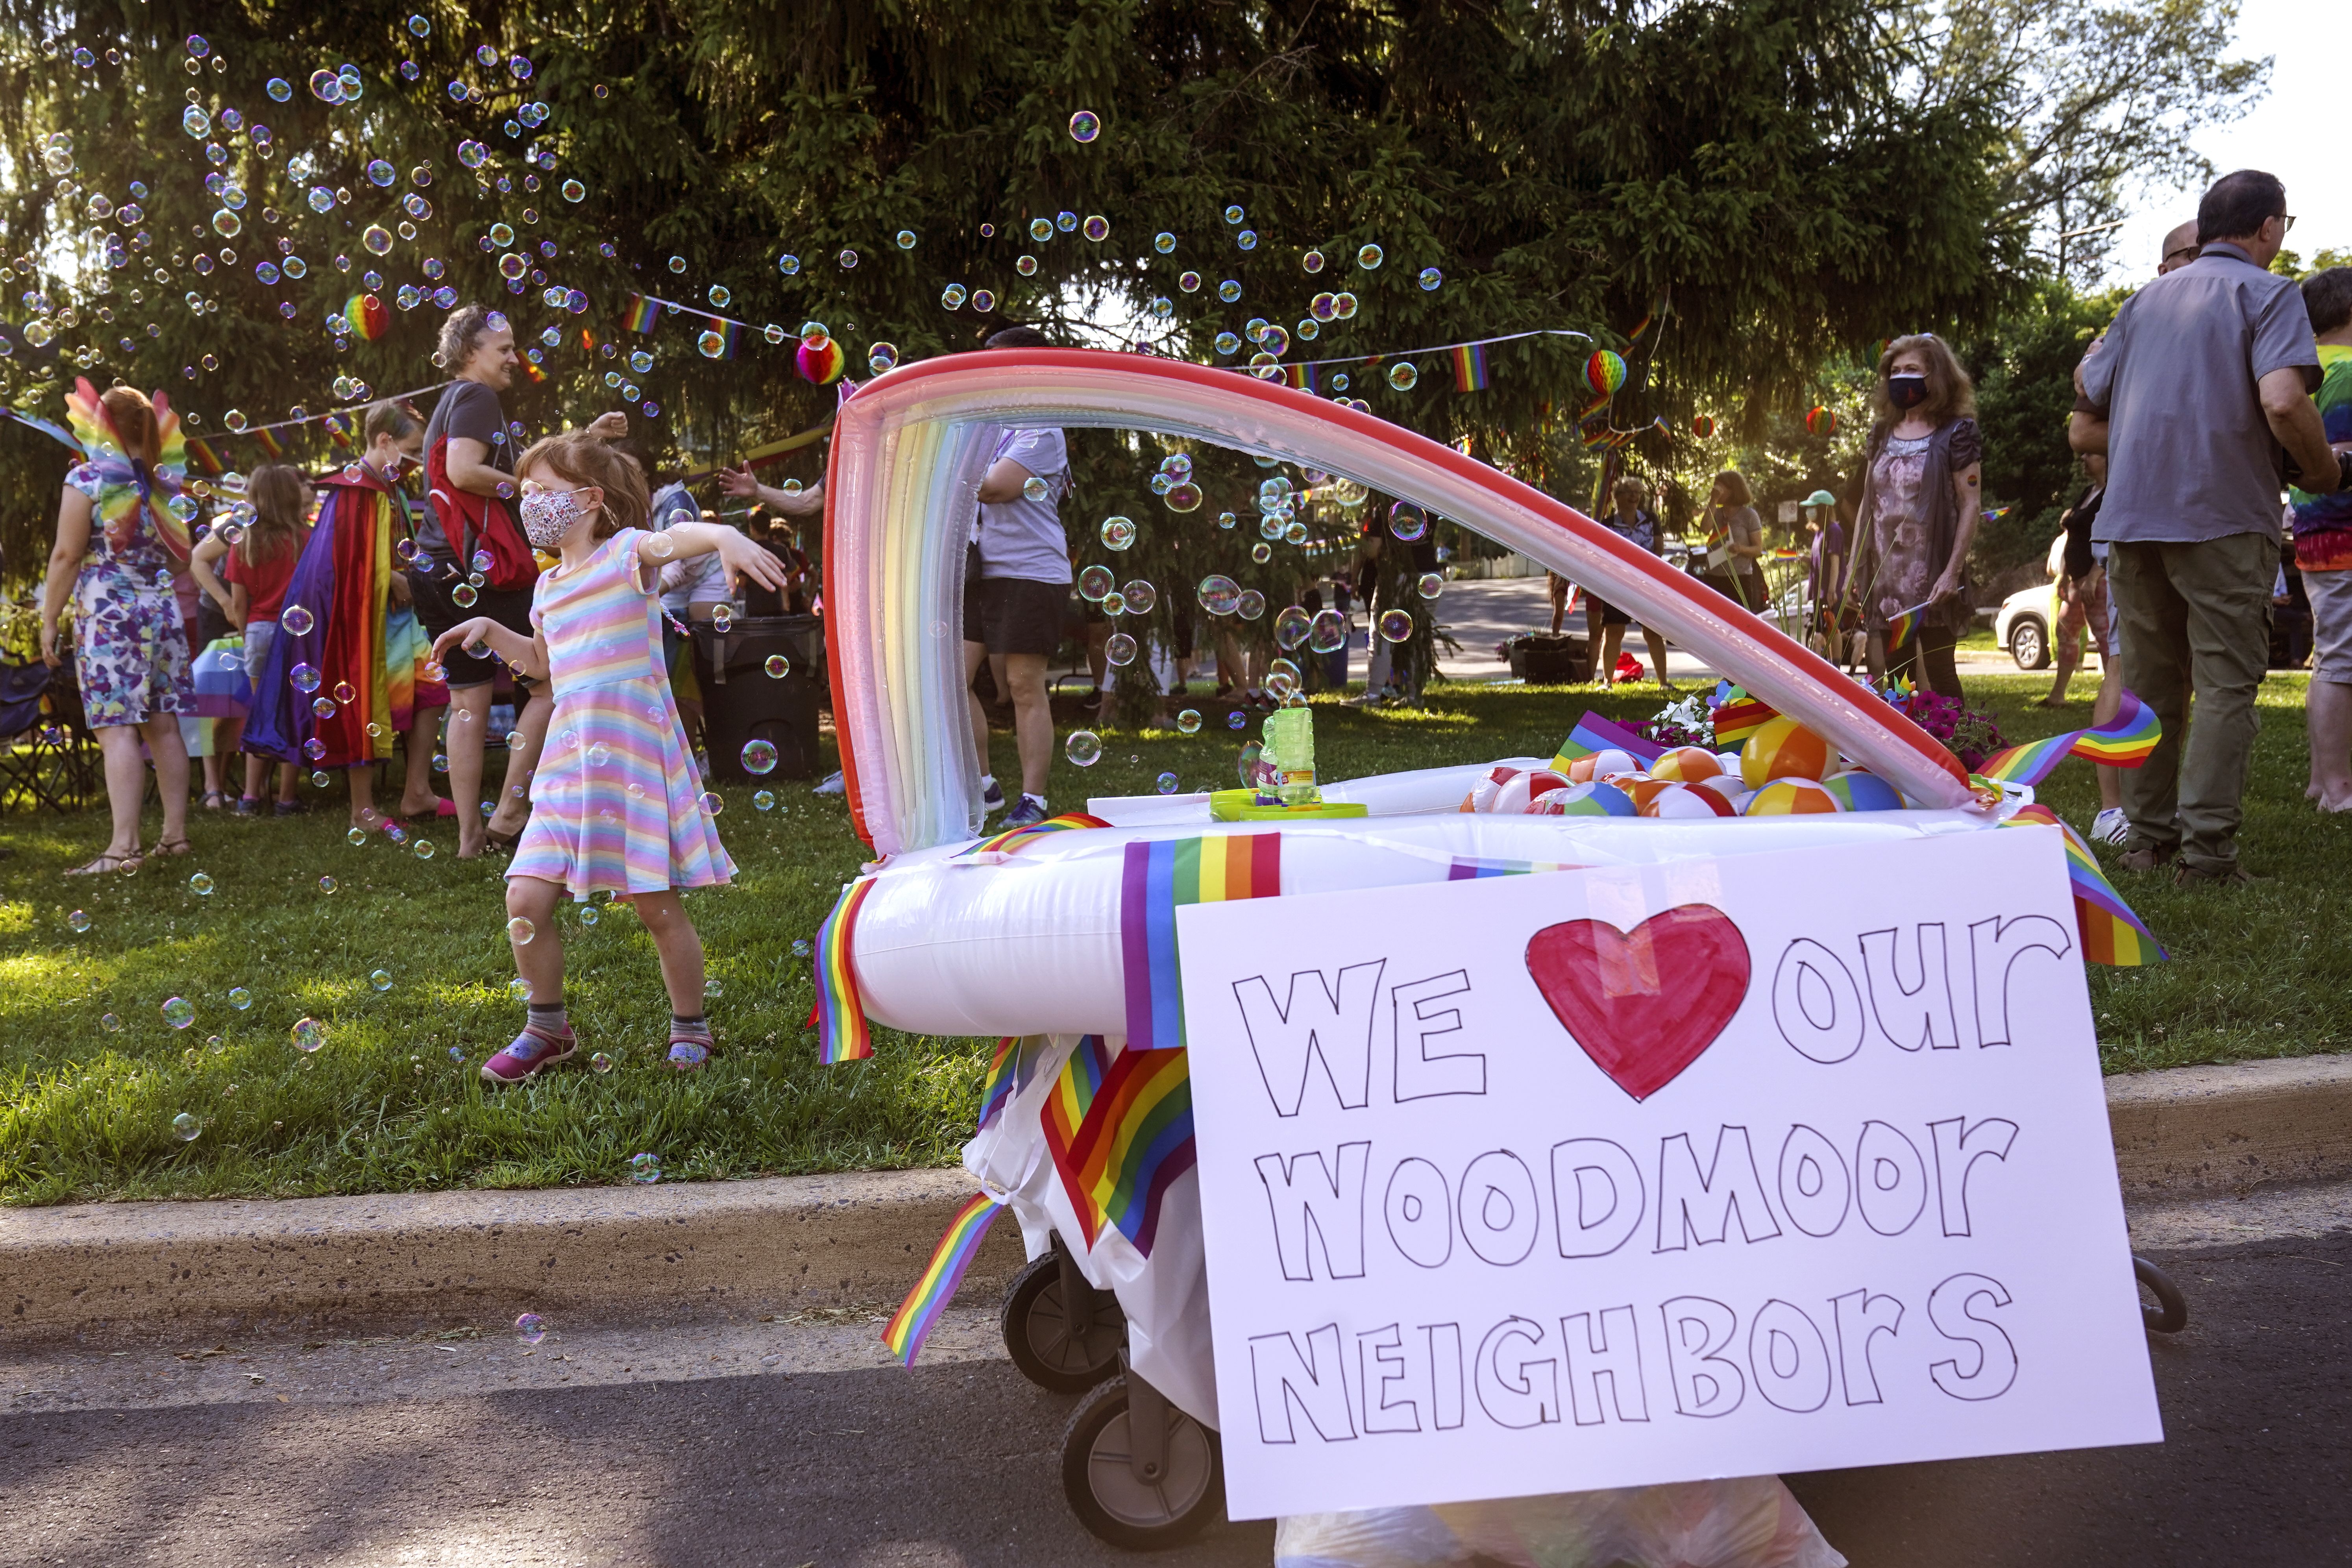 Photo of a bunch of people on the grass wearing a variety of rainbow colors, and a cart with a sign that says "We heart Woodmoor neighbors"